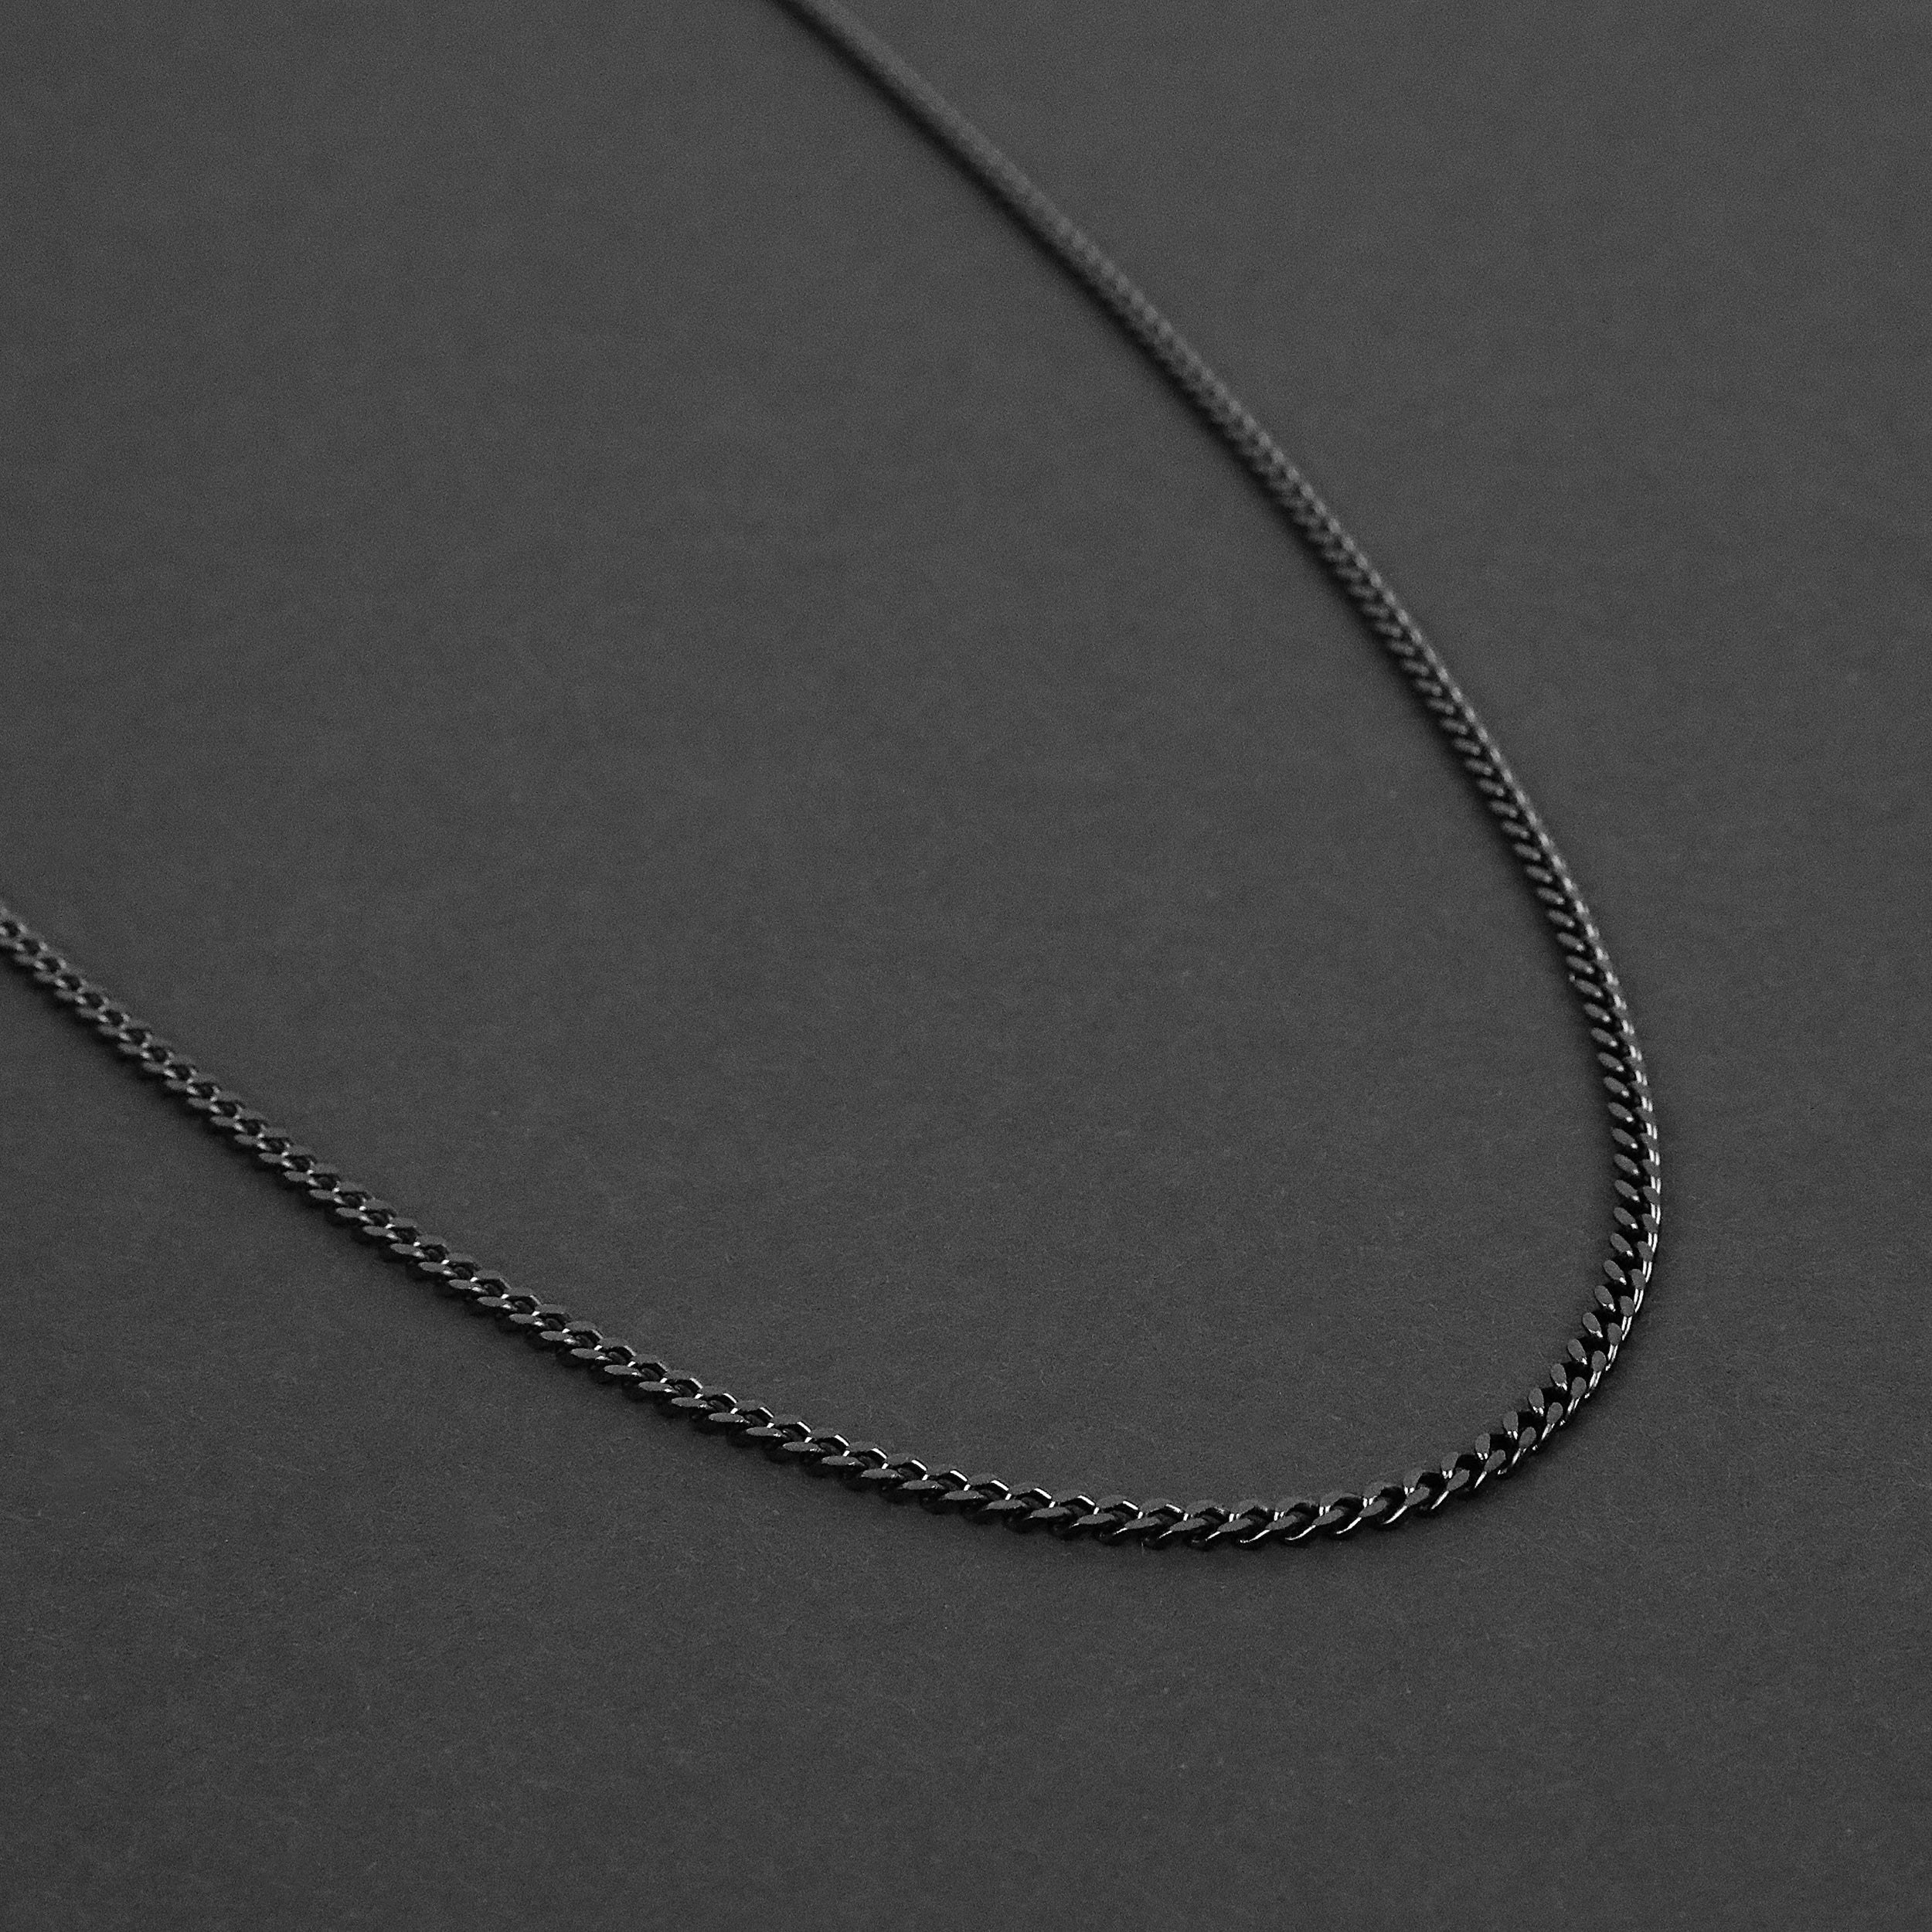 Personalized Cuban Chain - Black 3mm